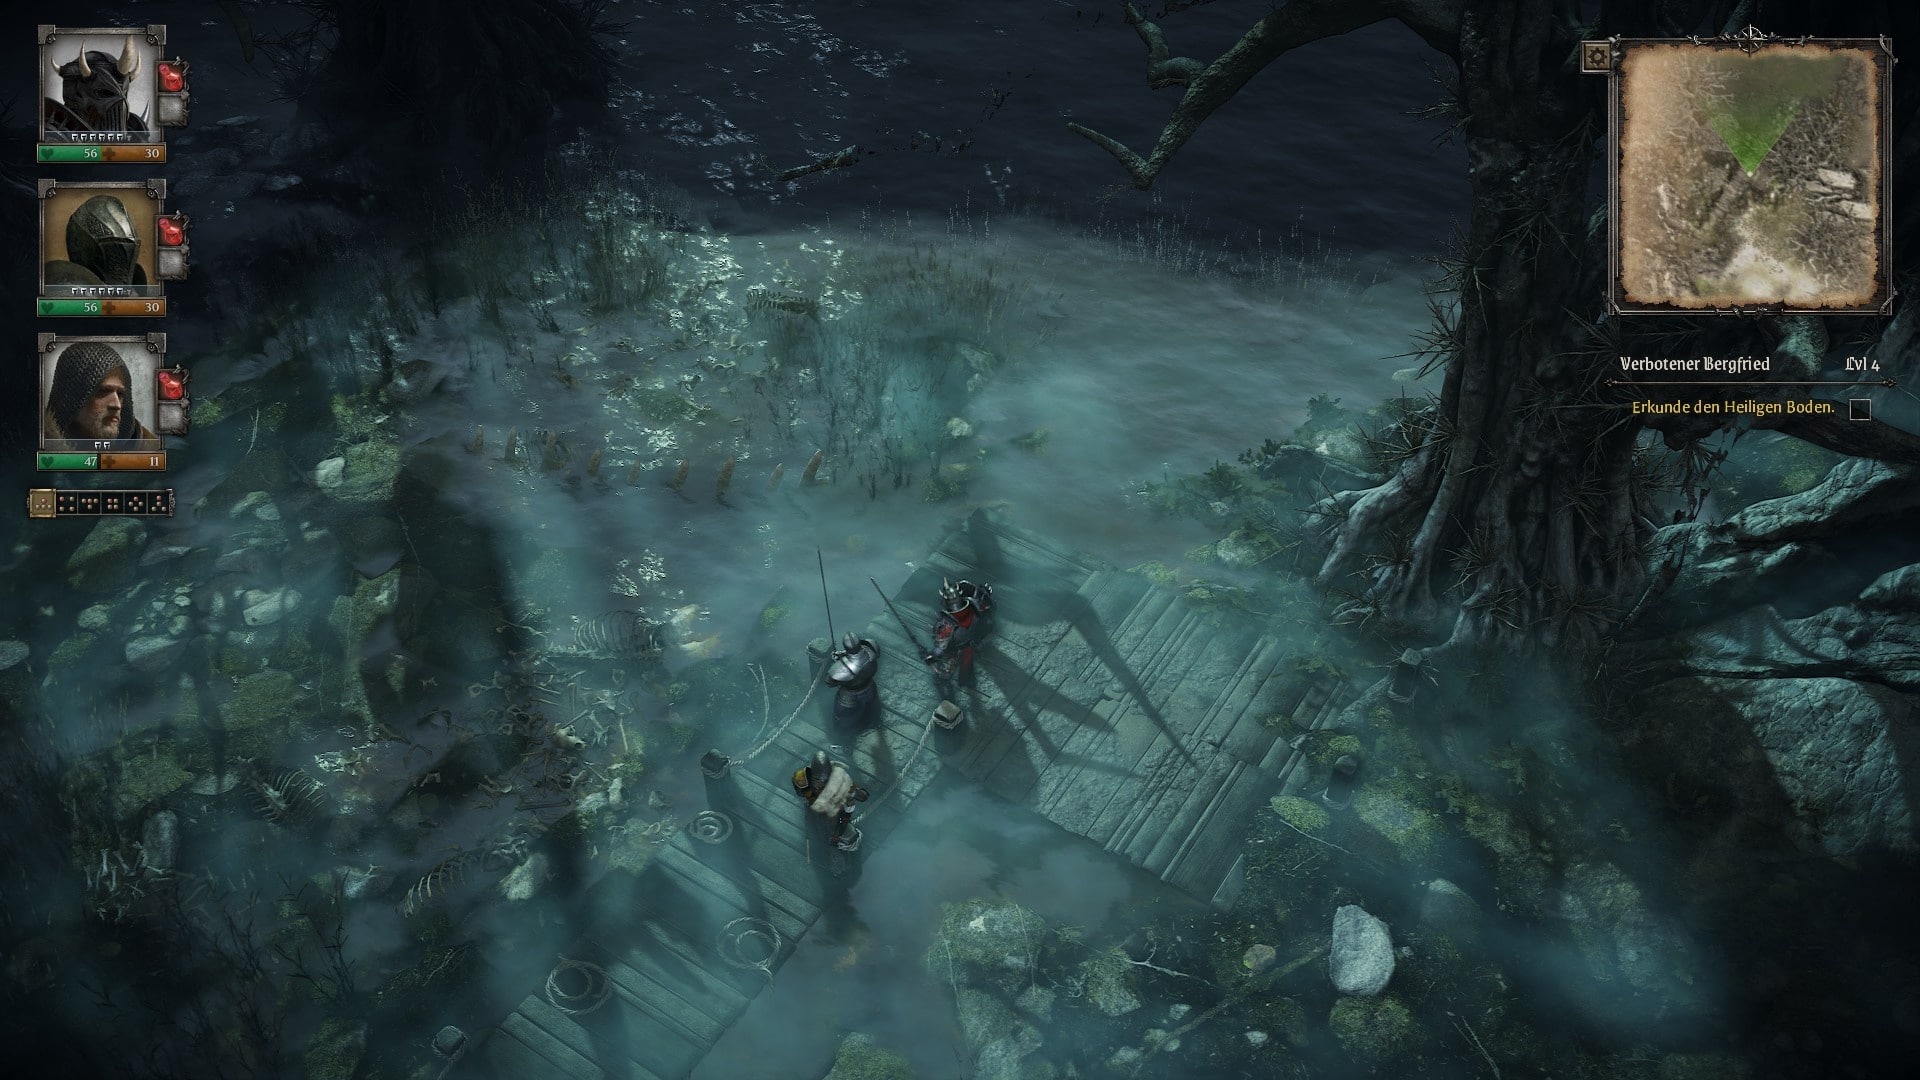 (The individual levels offer many visual highlights such as this swamp in the moonlight. However, especially in the later course of the game, a certain wear and tear of the level elements sets in.)